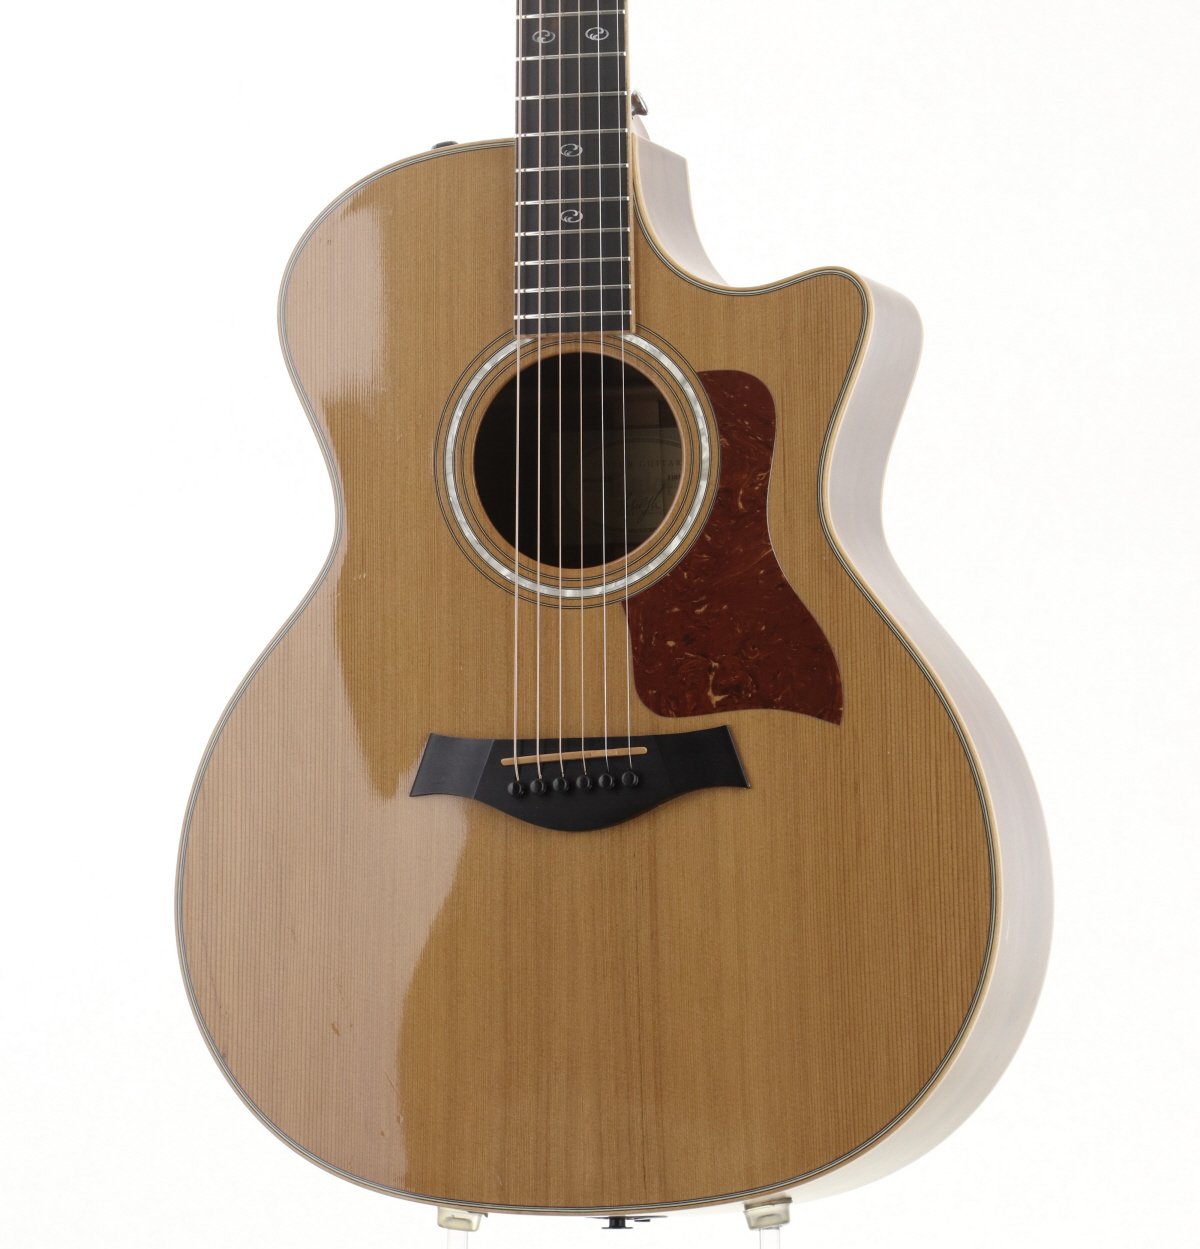 [SN 1103281097] USED Taylor / 414ce Fall Limited 2011 ES1 [2011] Taylor Eleaco acoustic guitar [08]